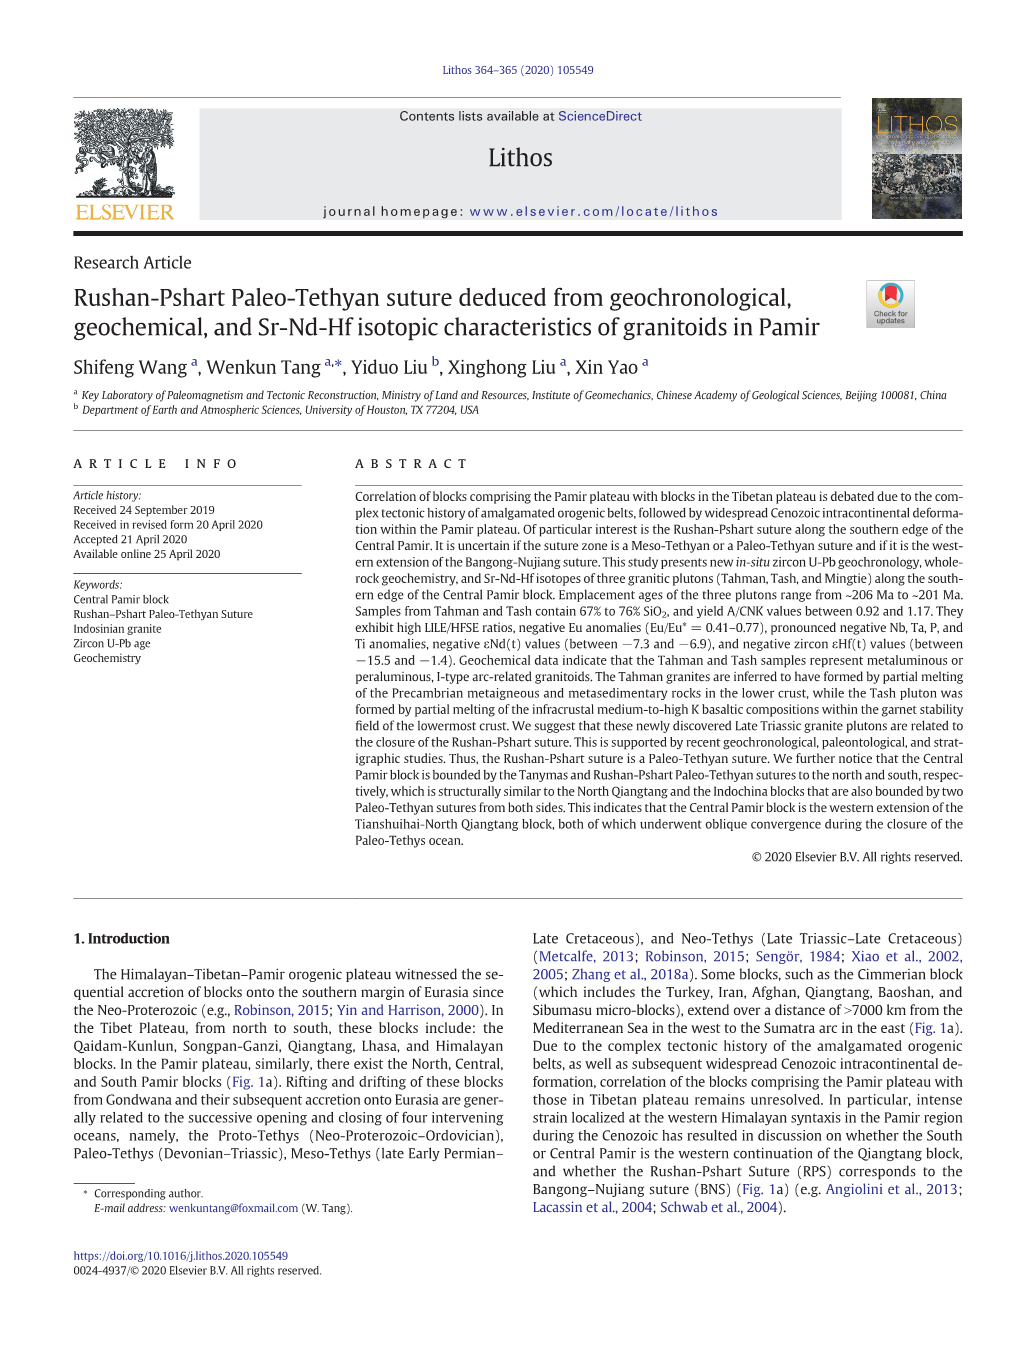 Rushan-Pshart Paleo-Tethyan Suture Deduced from Geochronological, Geochemical, and Sr-Nd-Hf Isotopic Characteristics of Granitoids in Pamir